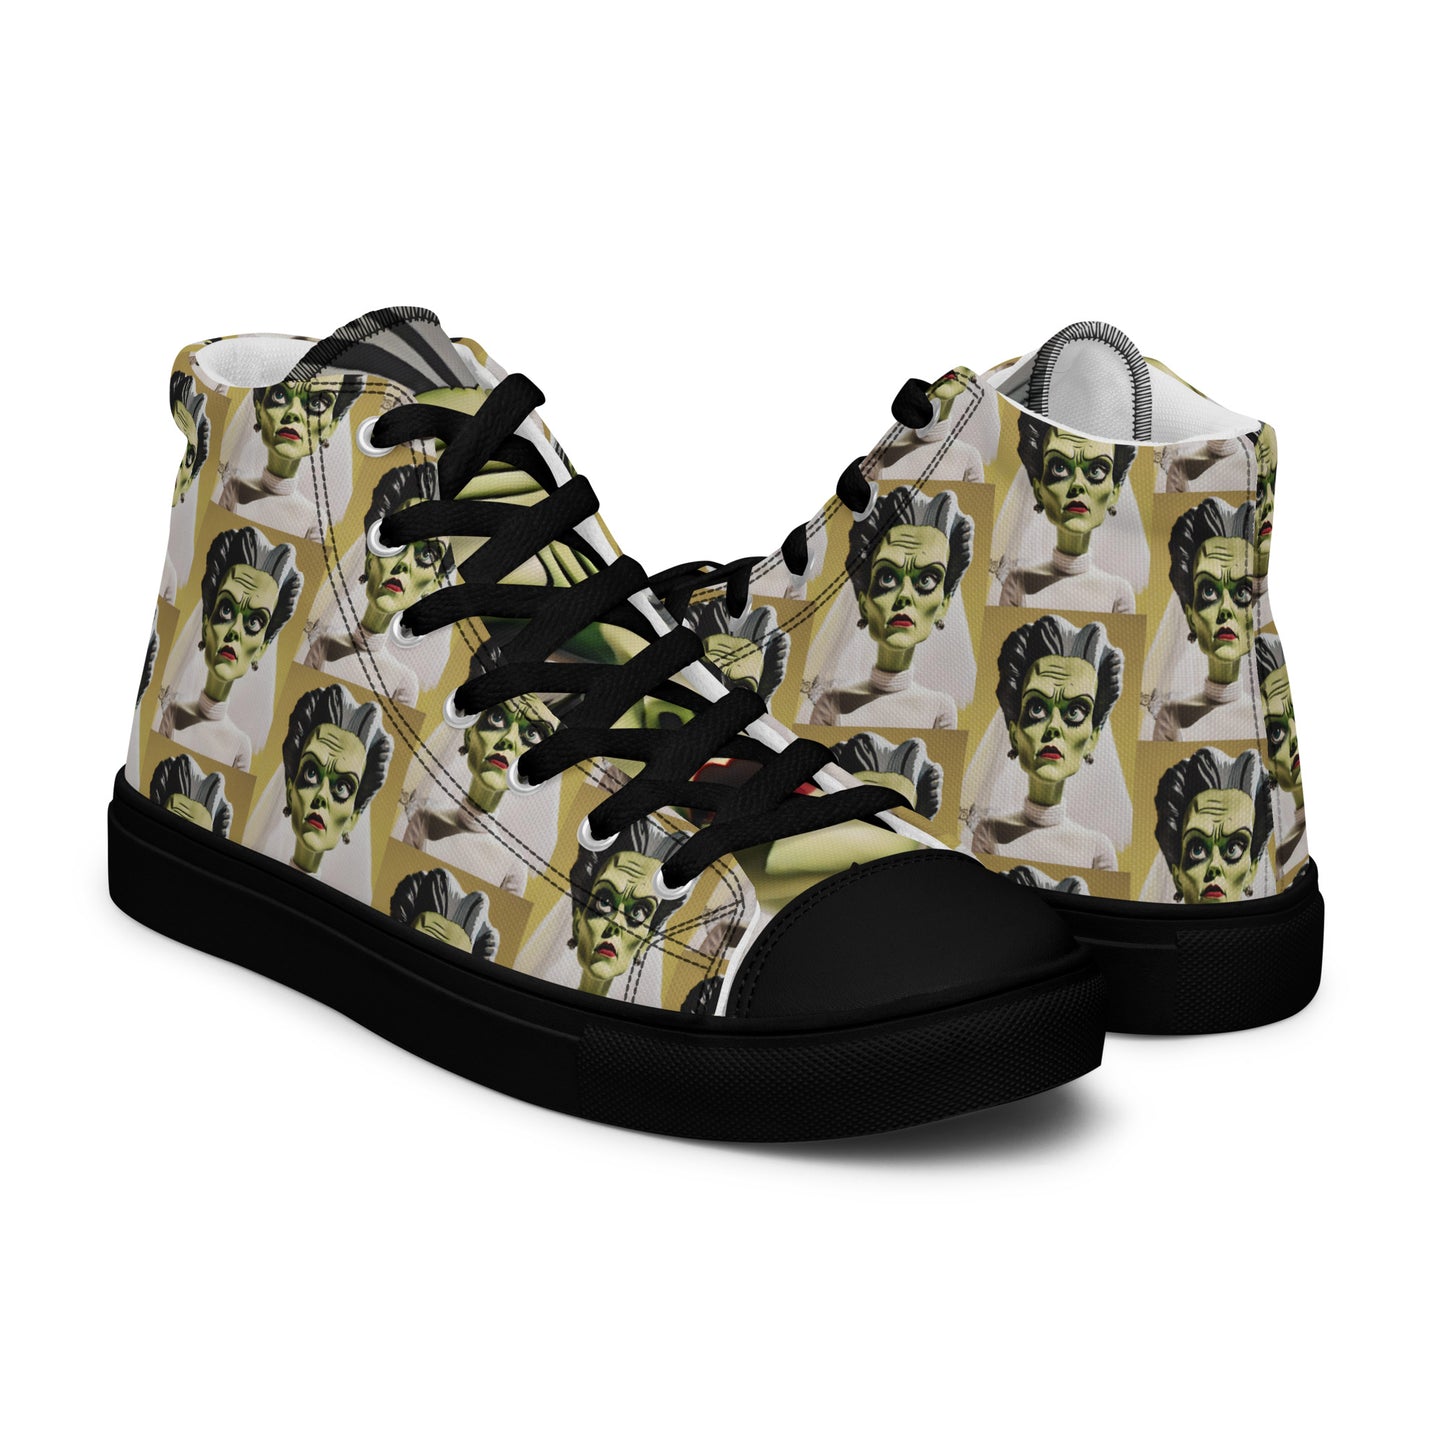 WOMEN'S BRIDE OF FRANK HIGHT TOP CANVAS SHOES